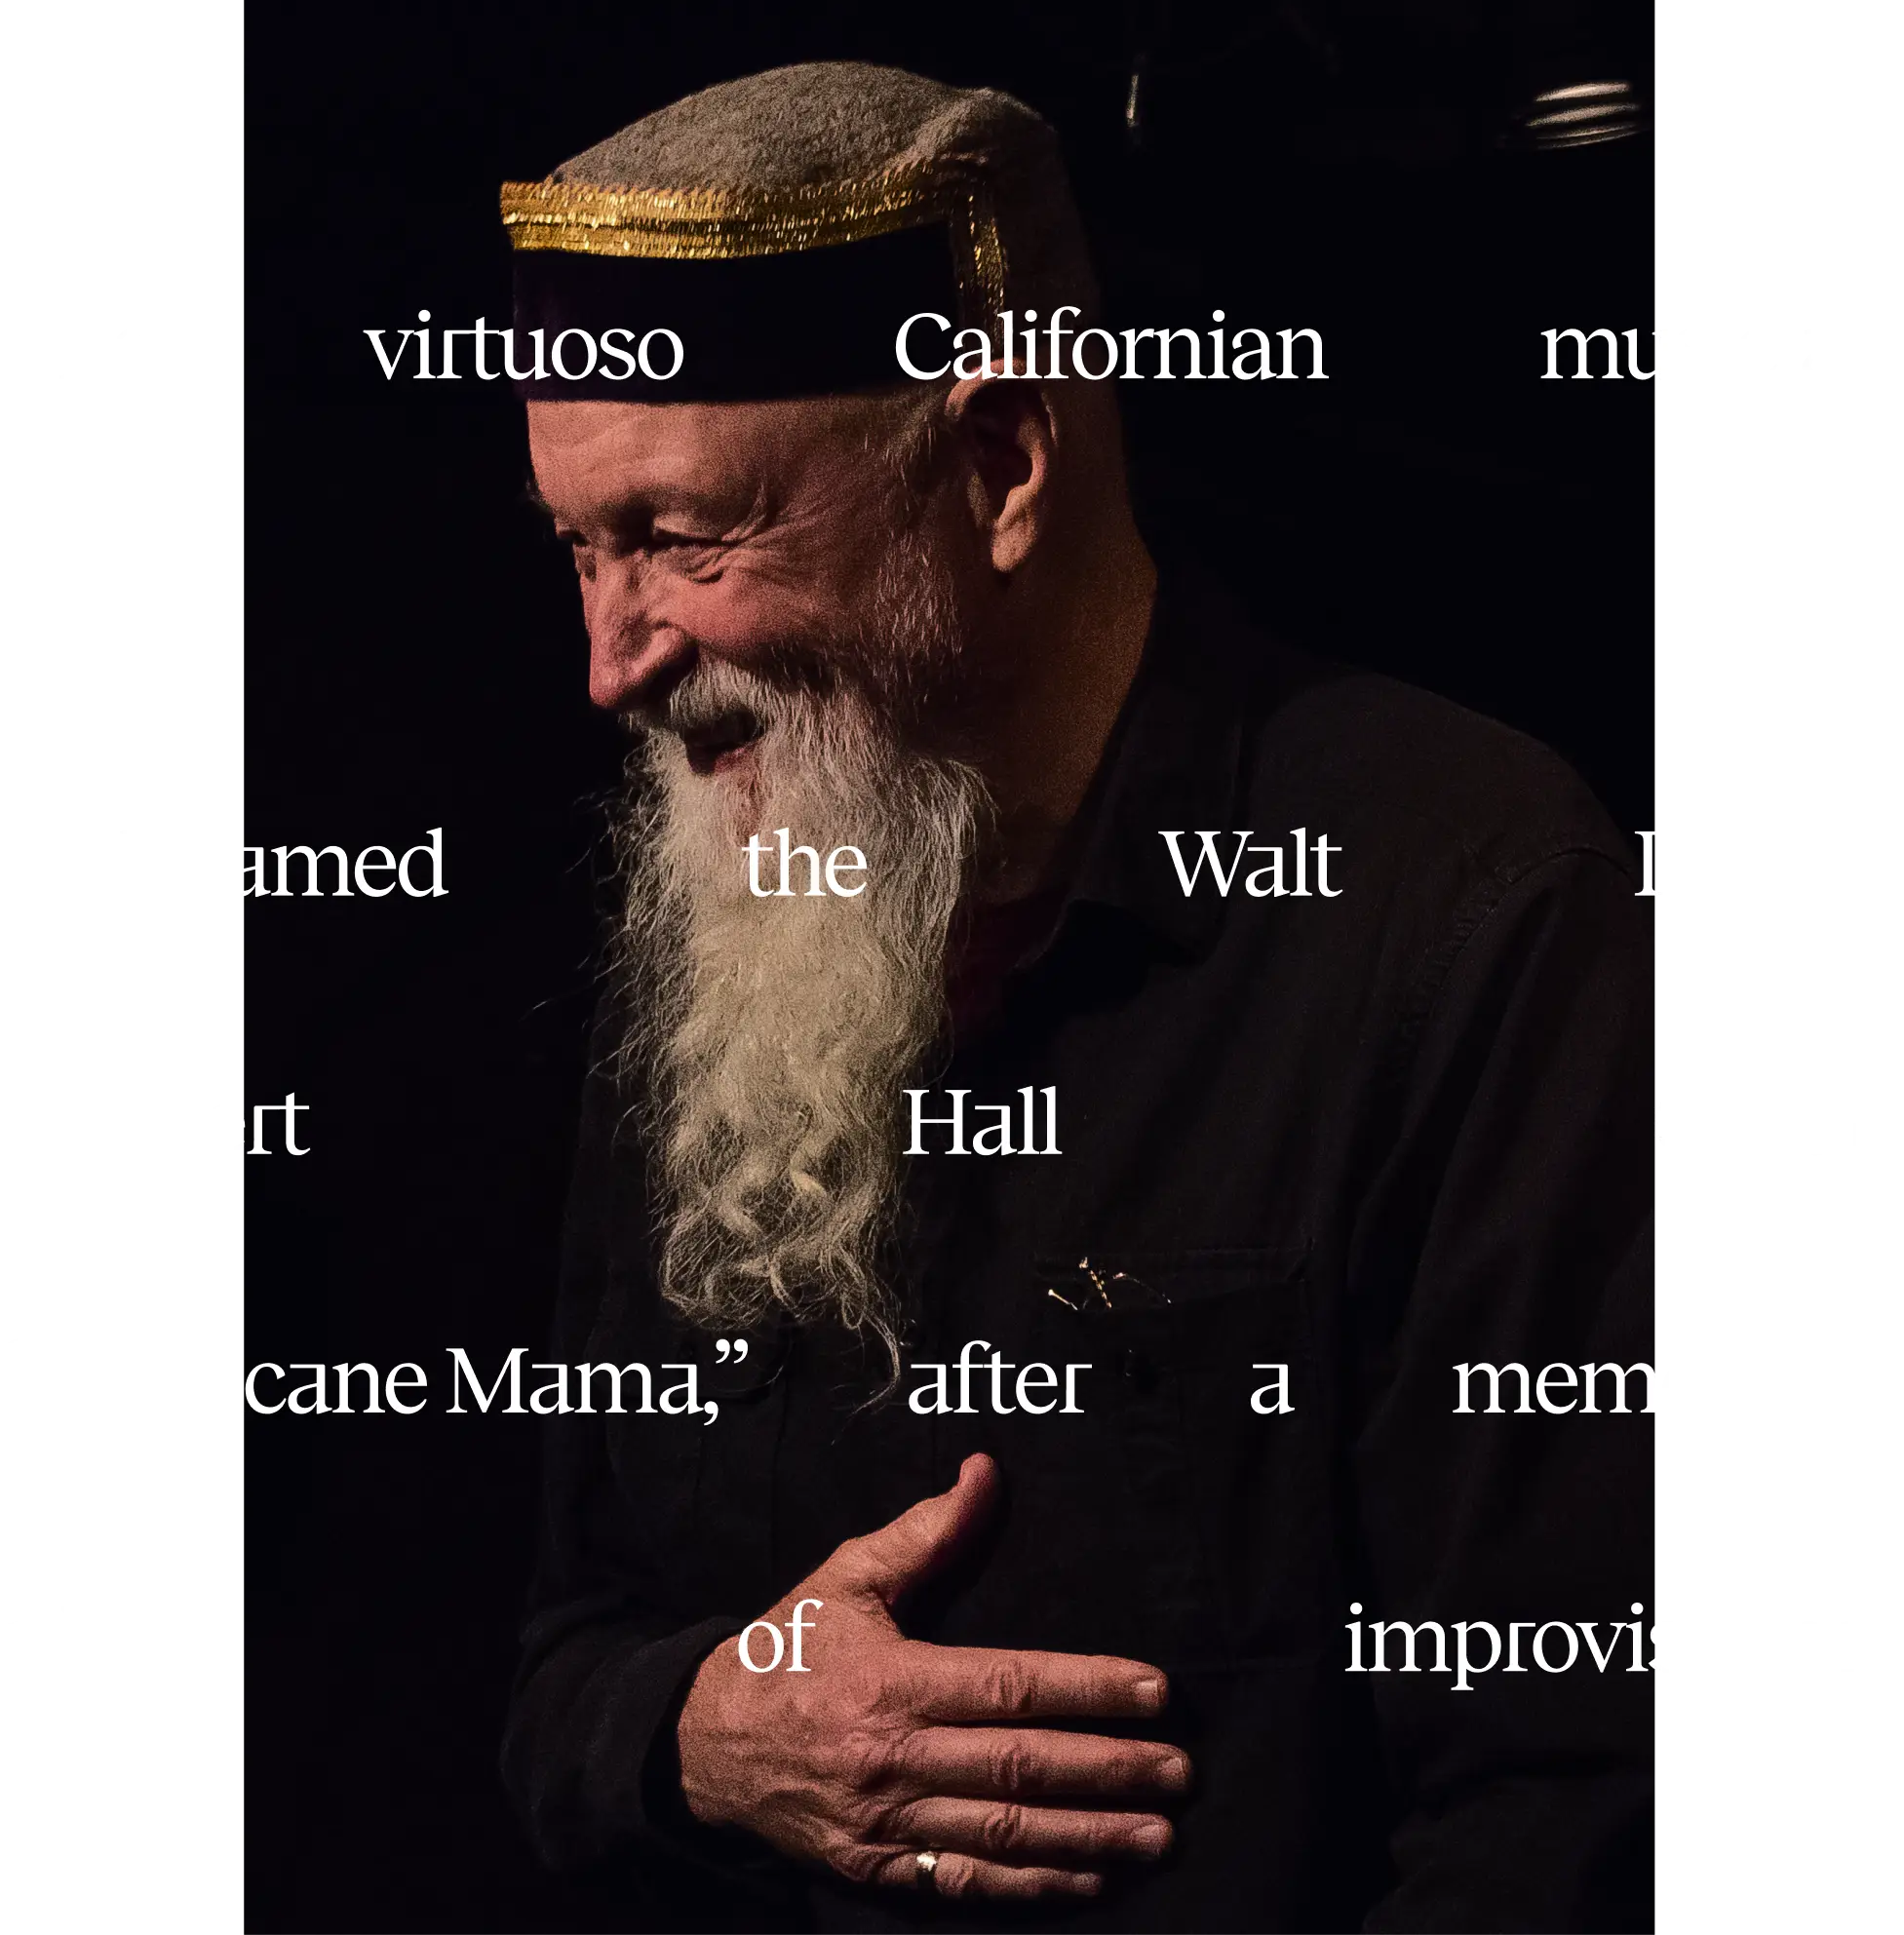 American composer and musician Terry Riley dressed in a black shirt that contrasts his long white beard.